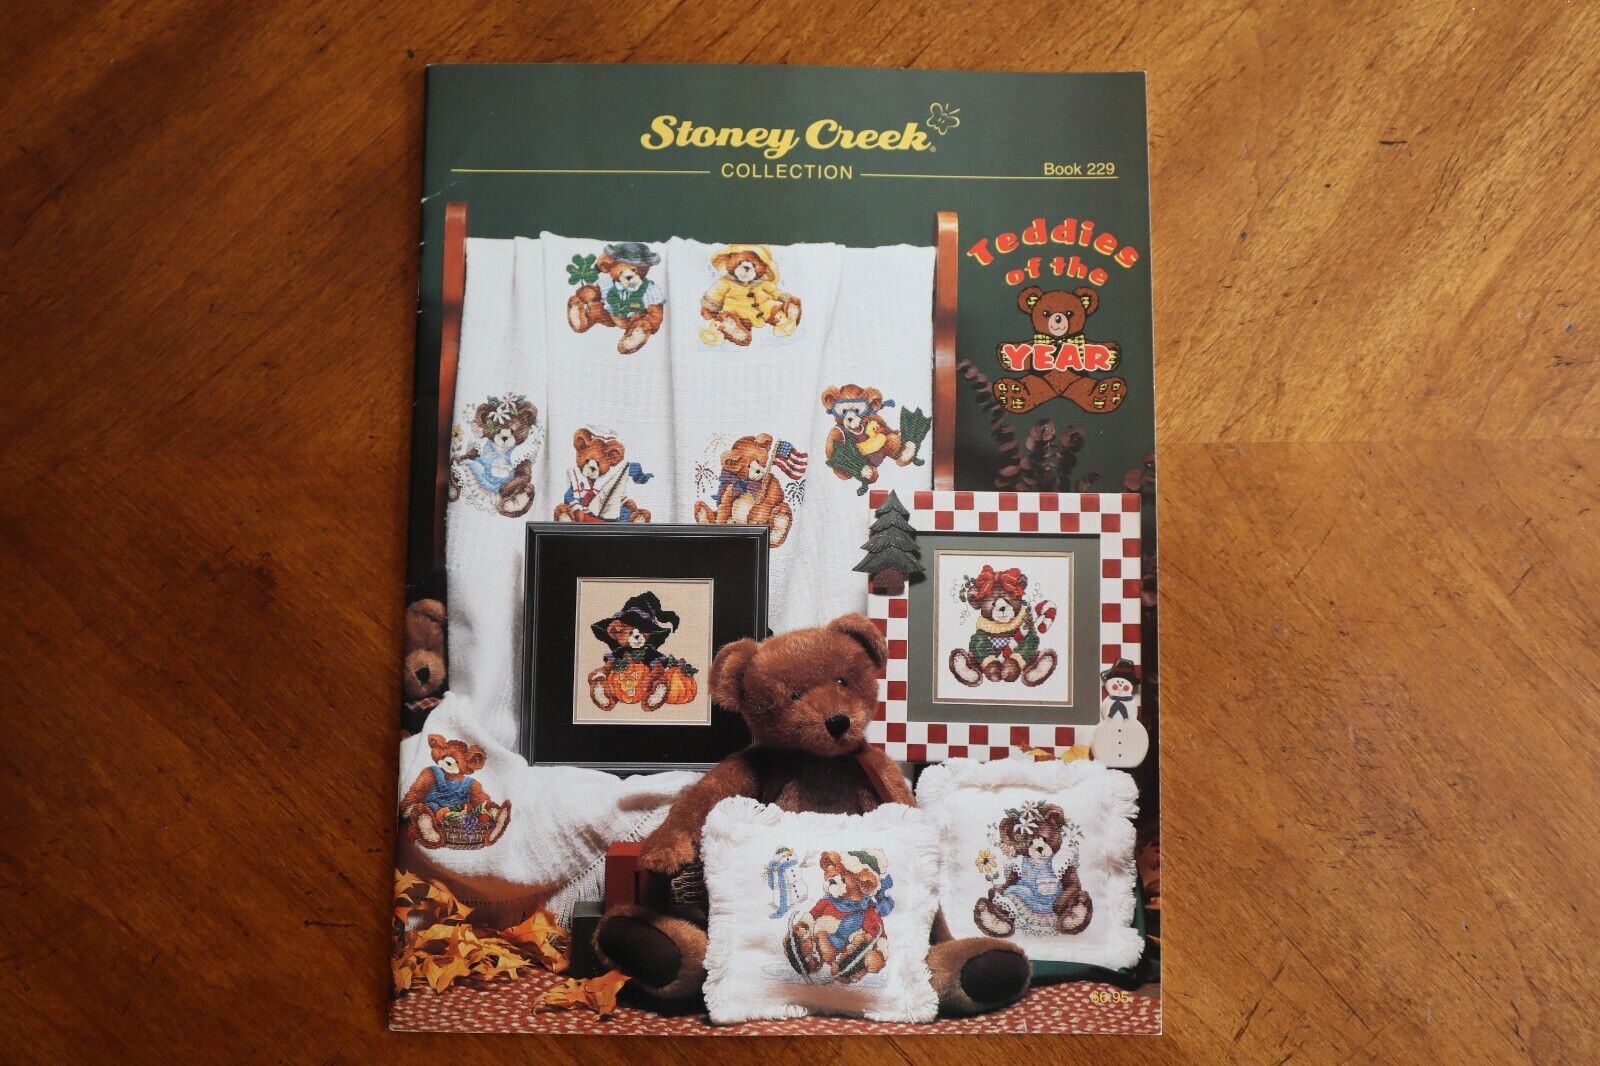 Stony Creek Collection "Teddies of the Year" Counted Cross Stitch Book 229- 1999 - $8.55